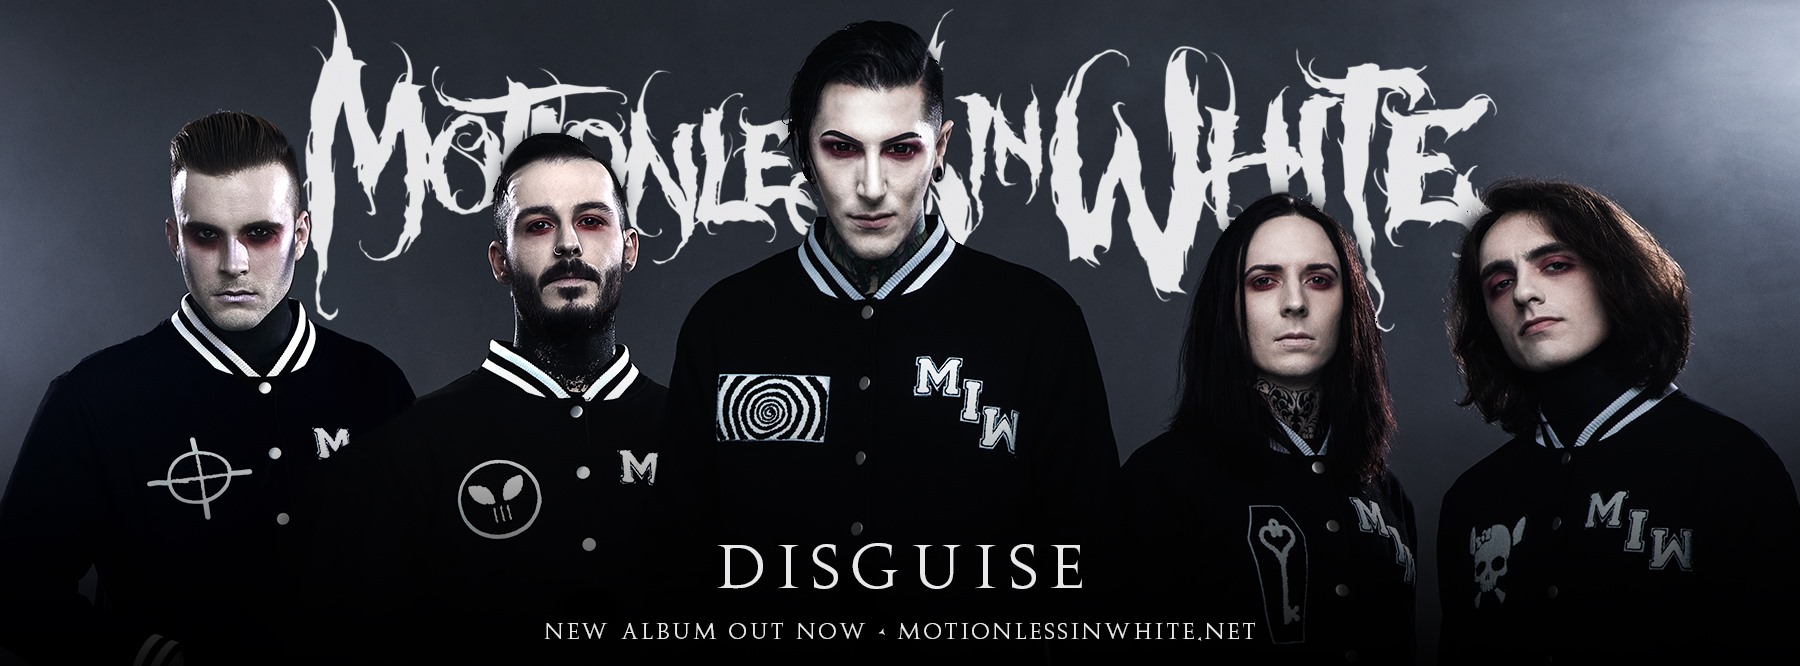 New number one. Motionless in White 2023. Группа Motionless in White. Motionless in White Disguise обложка. Motionless in White обложки альбомов.